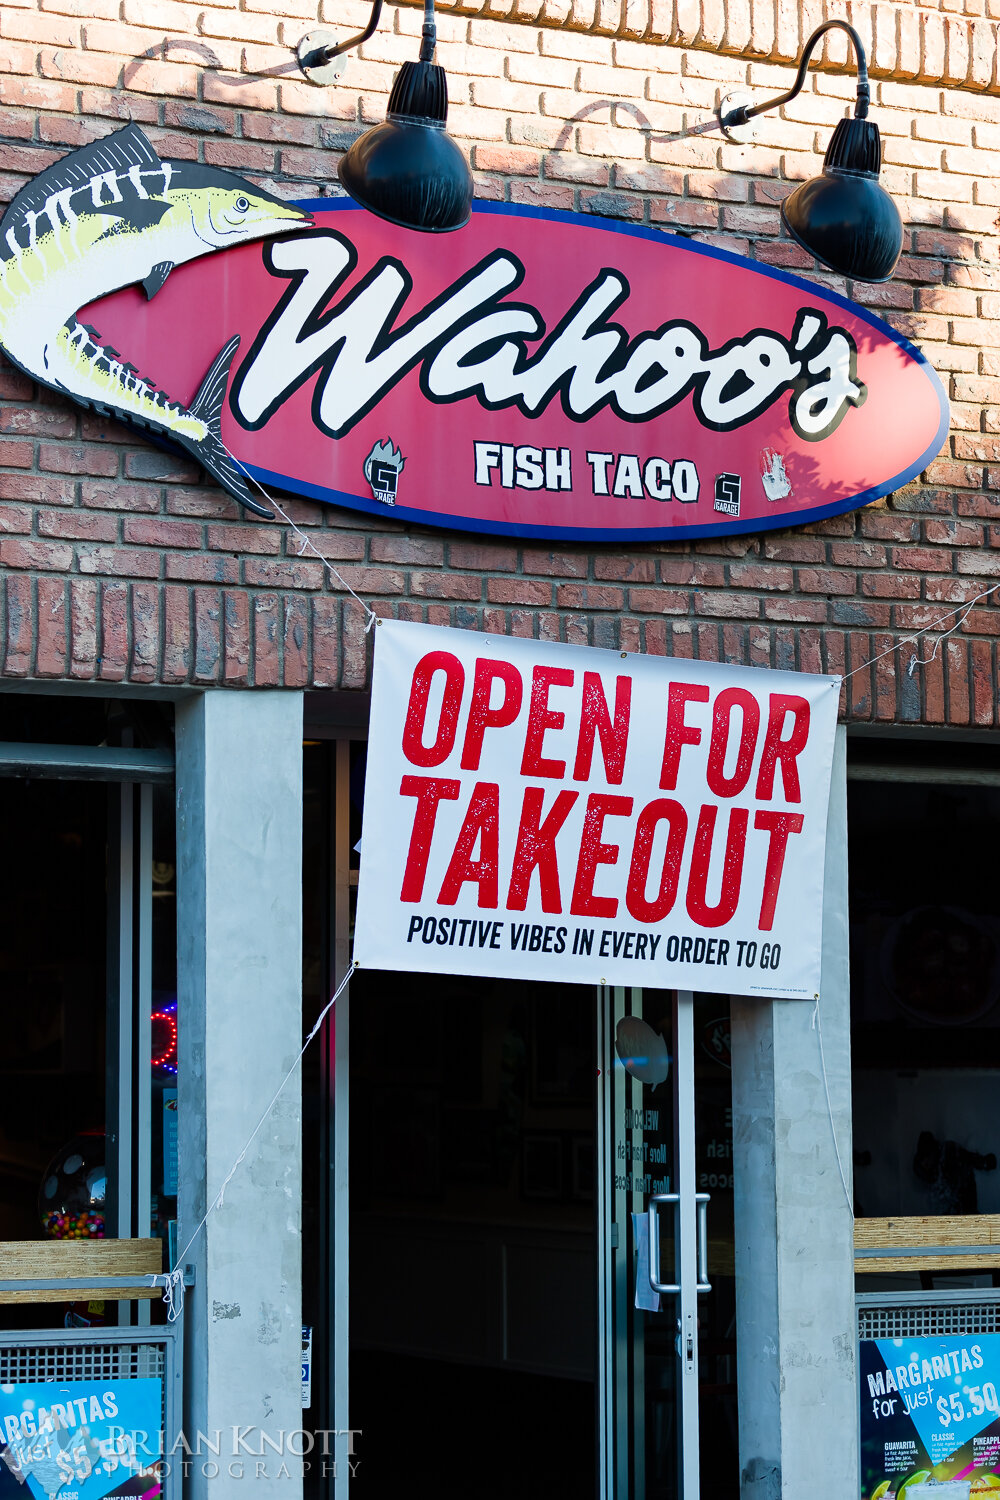 Restaurants have been ordered to close their doors except for take-out and delivery.